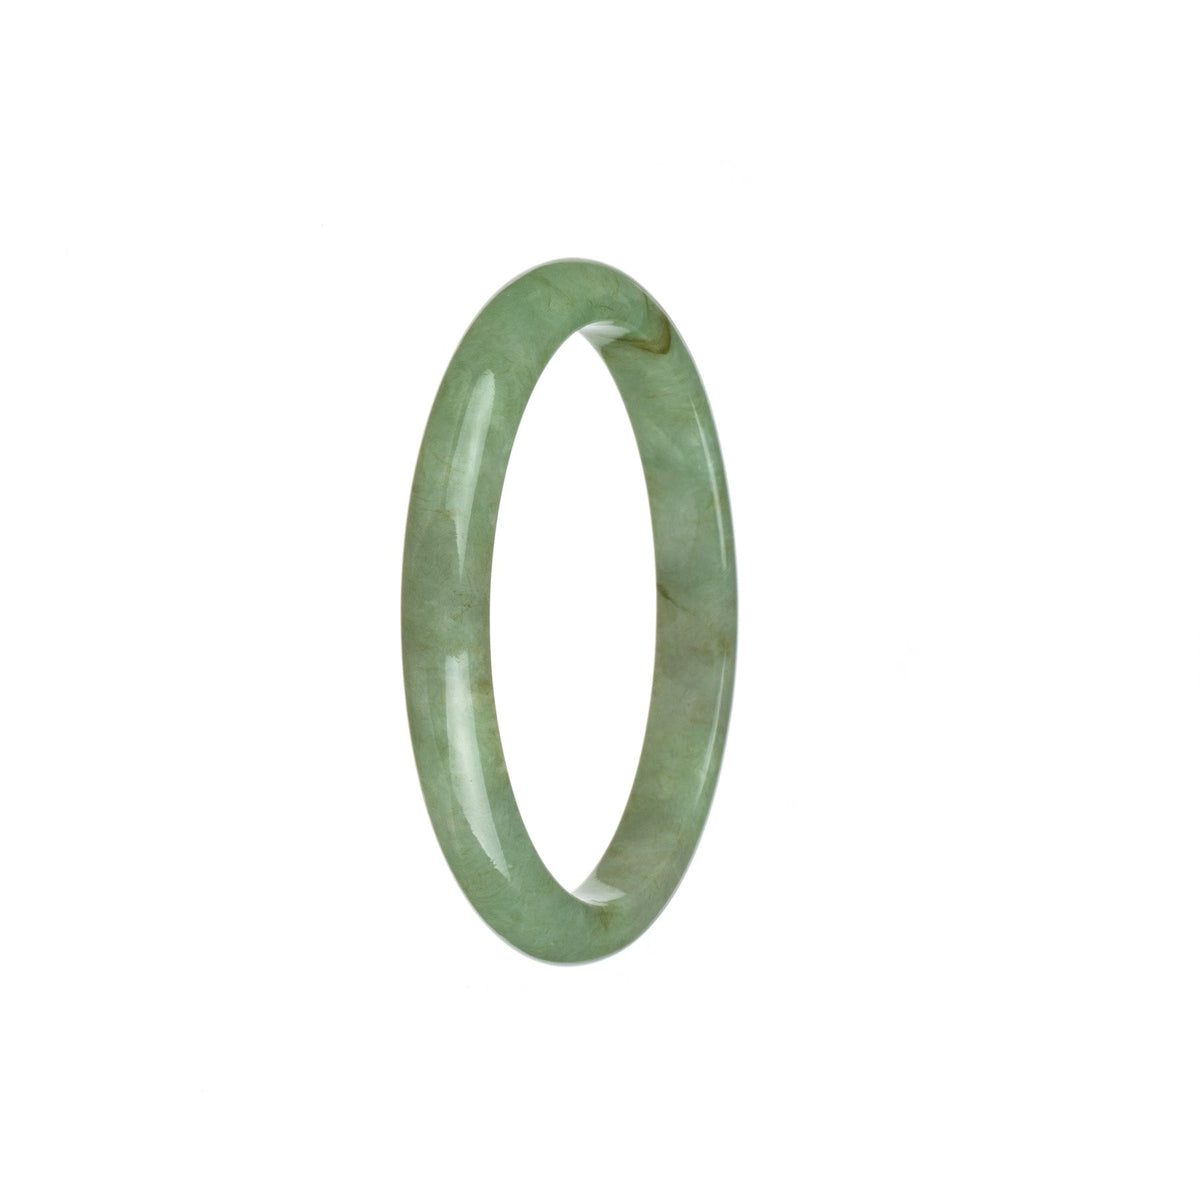 A light green Burma jade bracelet with a semi-round shape, measuring 54mm. The bracelet is made of genuine grade A jade and is designed by MAYS™.